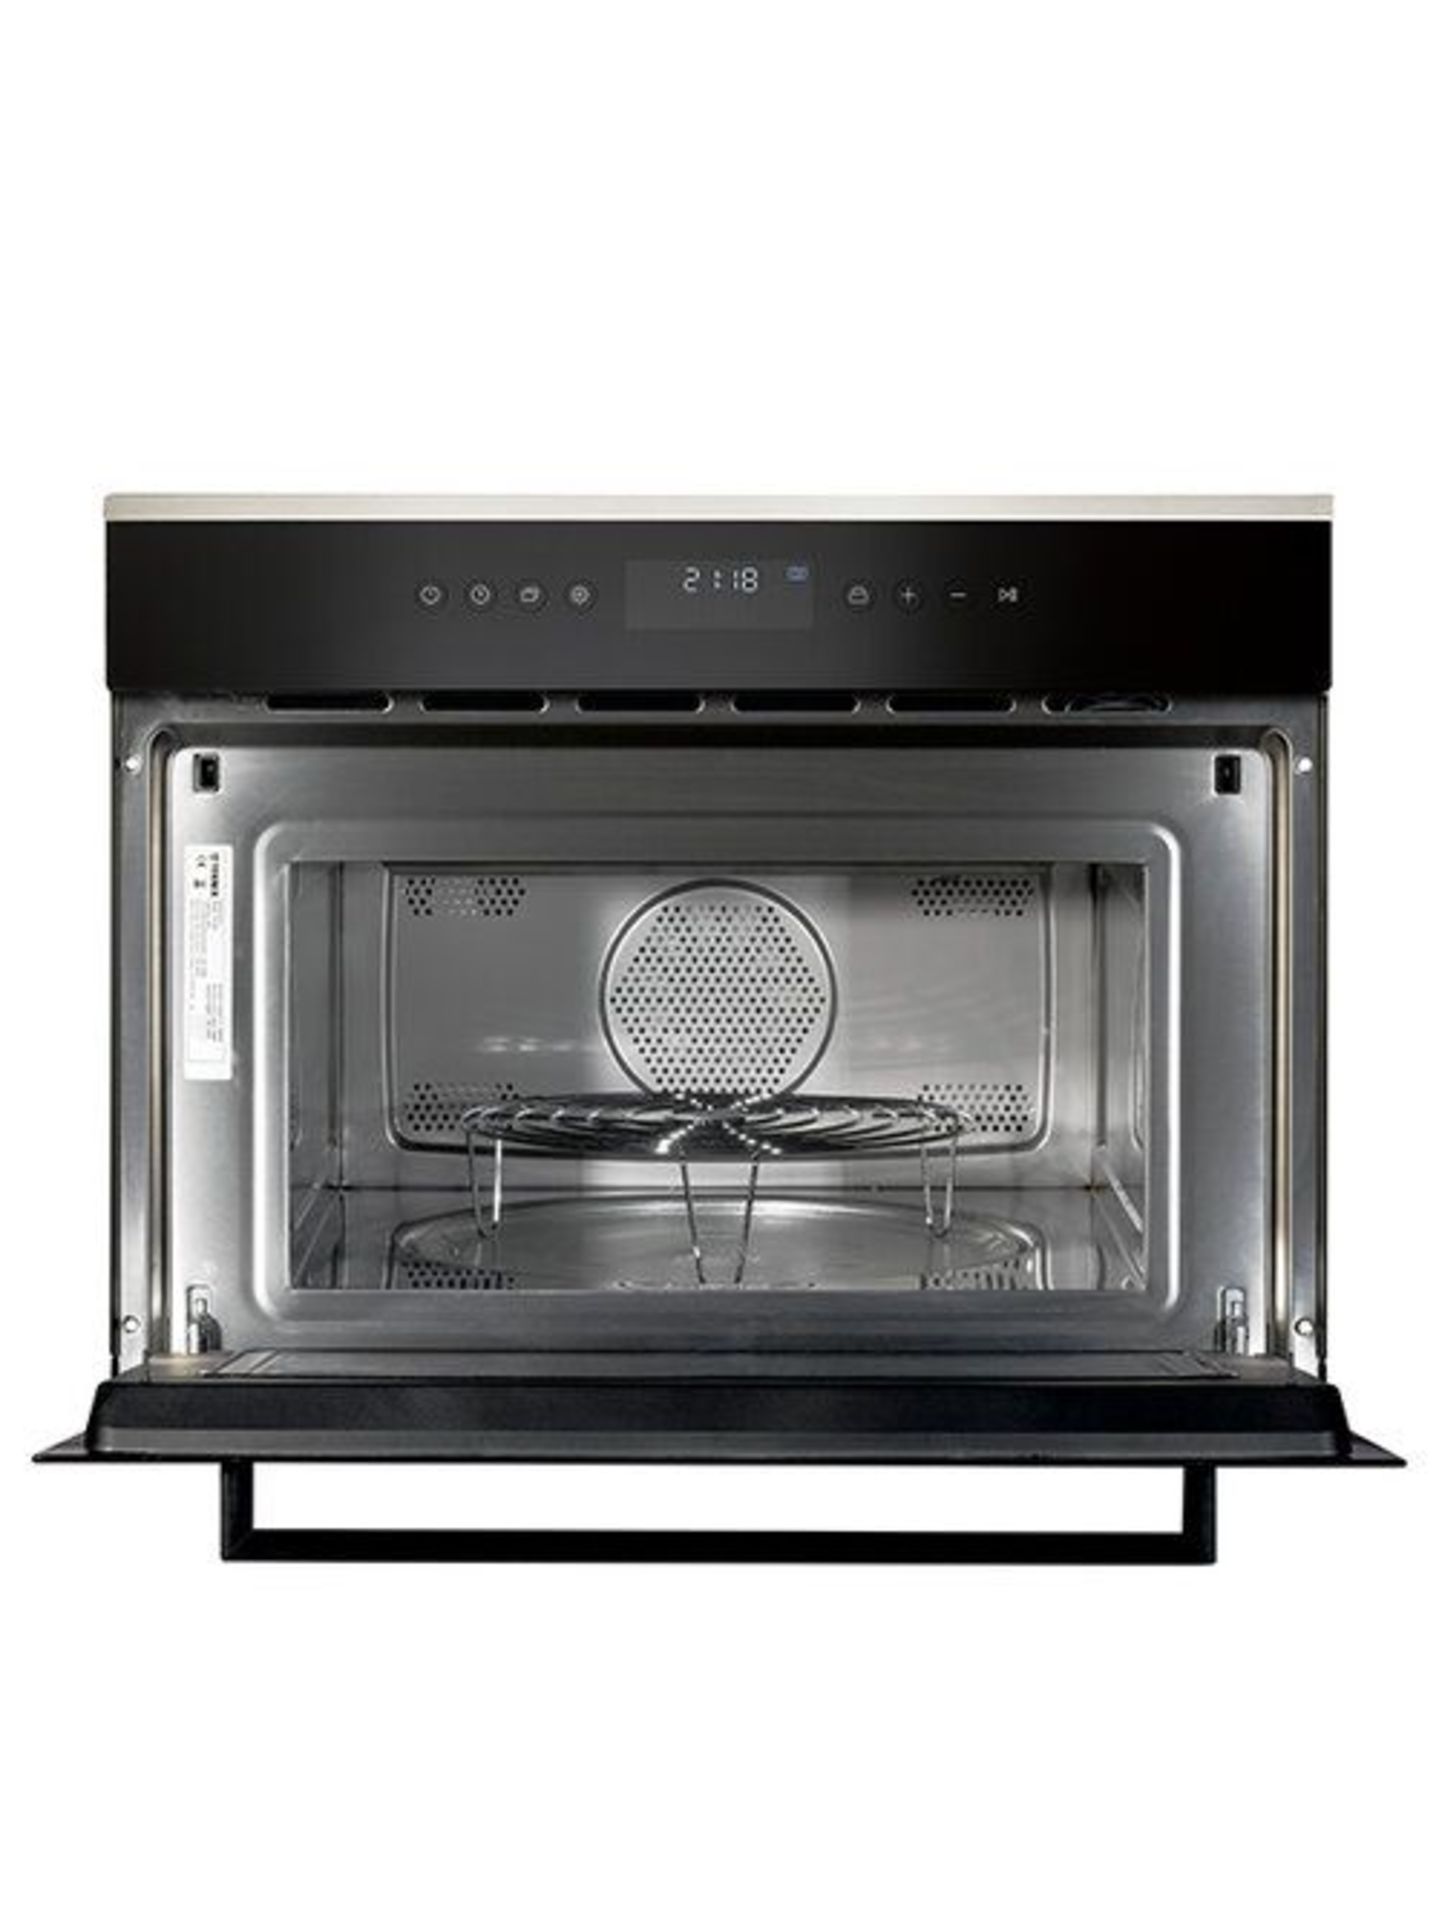 1 x Teknix SCC61X Built-In Multifunction Microwave Oven - Ex Display - RRP £499.00 - Image 2 of 9